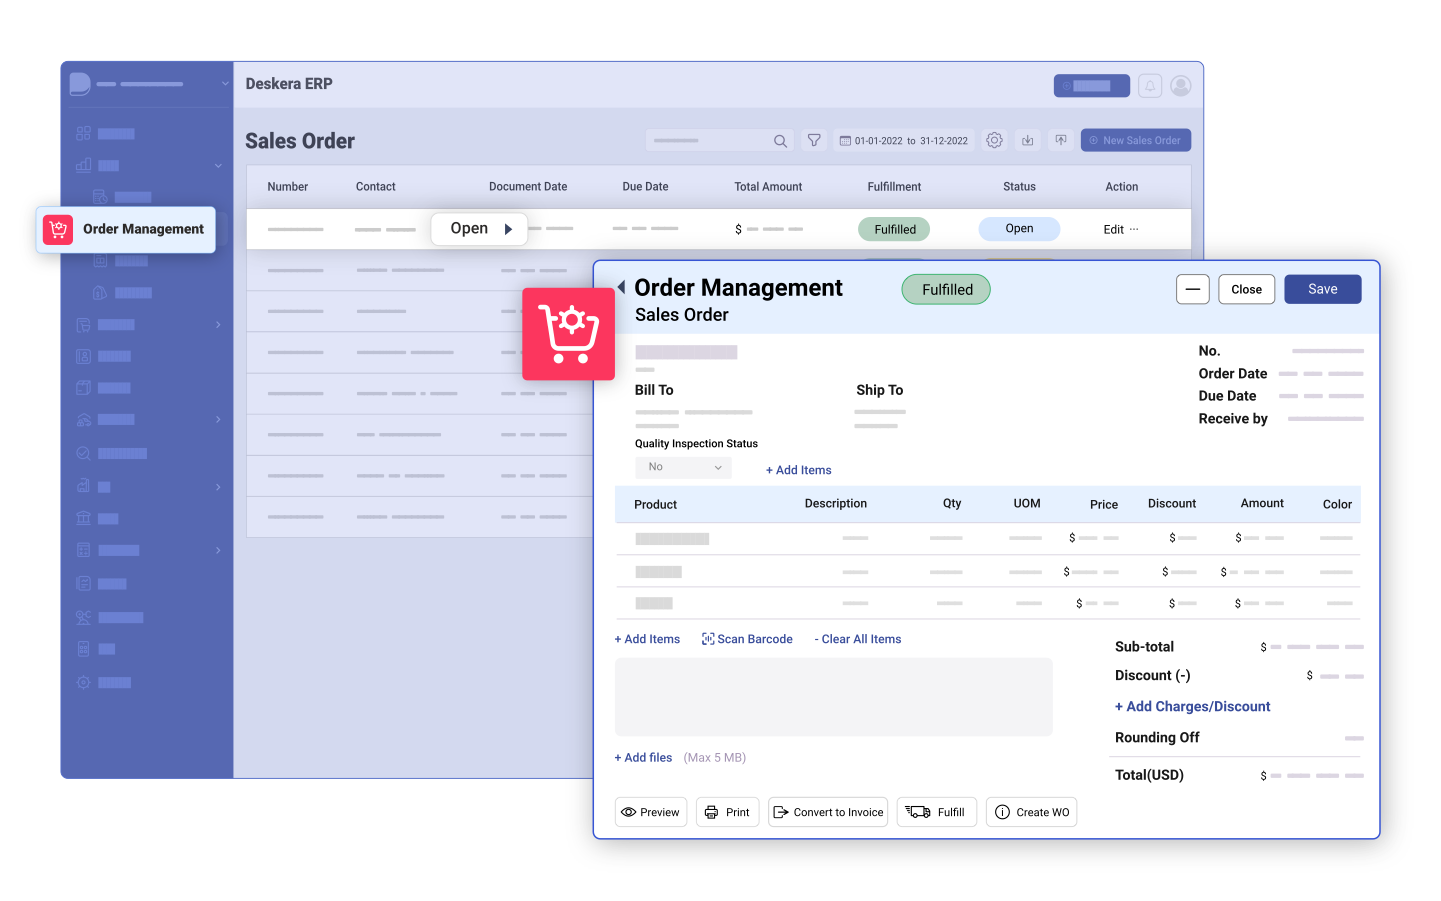 Manage all aspects of sales orders from multiple channels, including creation of shipments, pick-pack-ship, bill of lading and backorder tracking. Assign individual order numbers, generate picking lists, view statuses, and track delivery times.